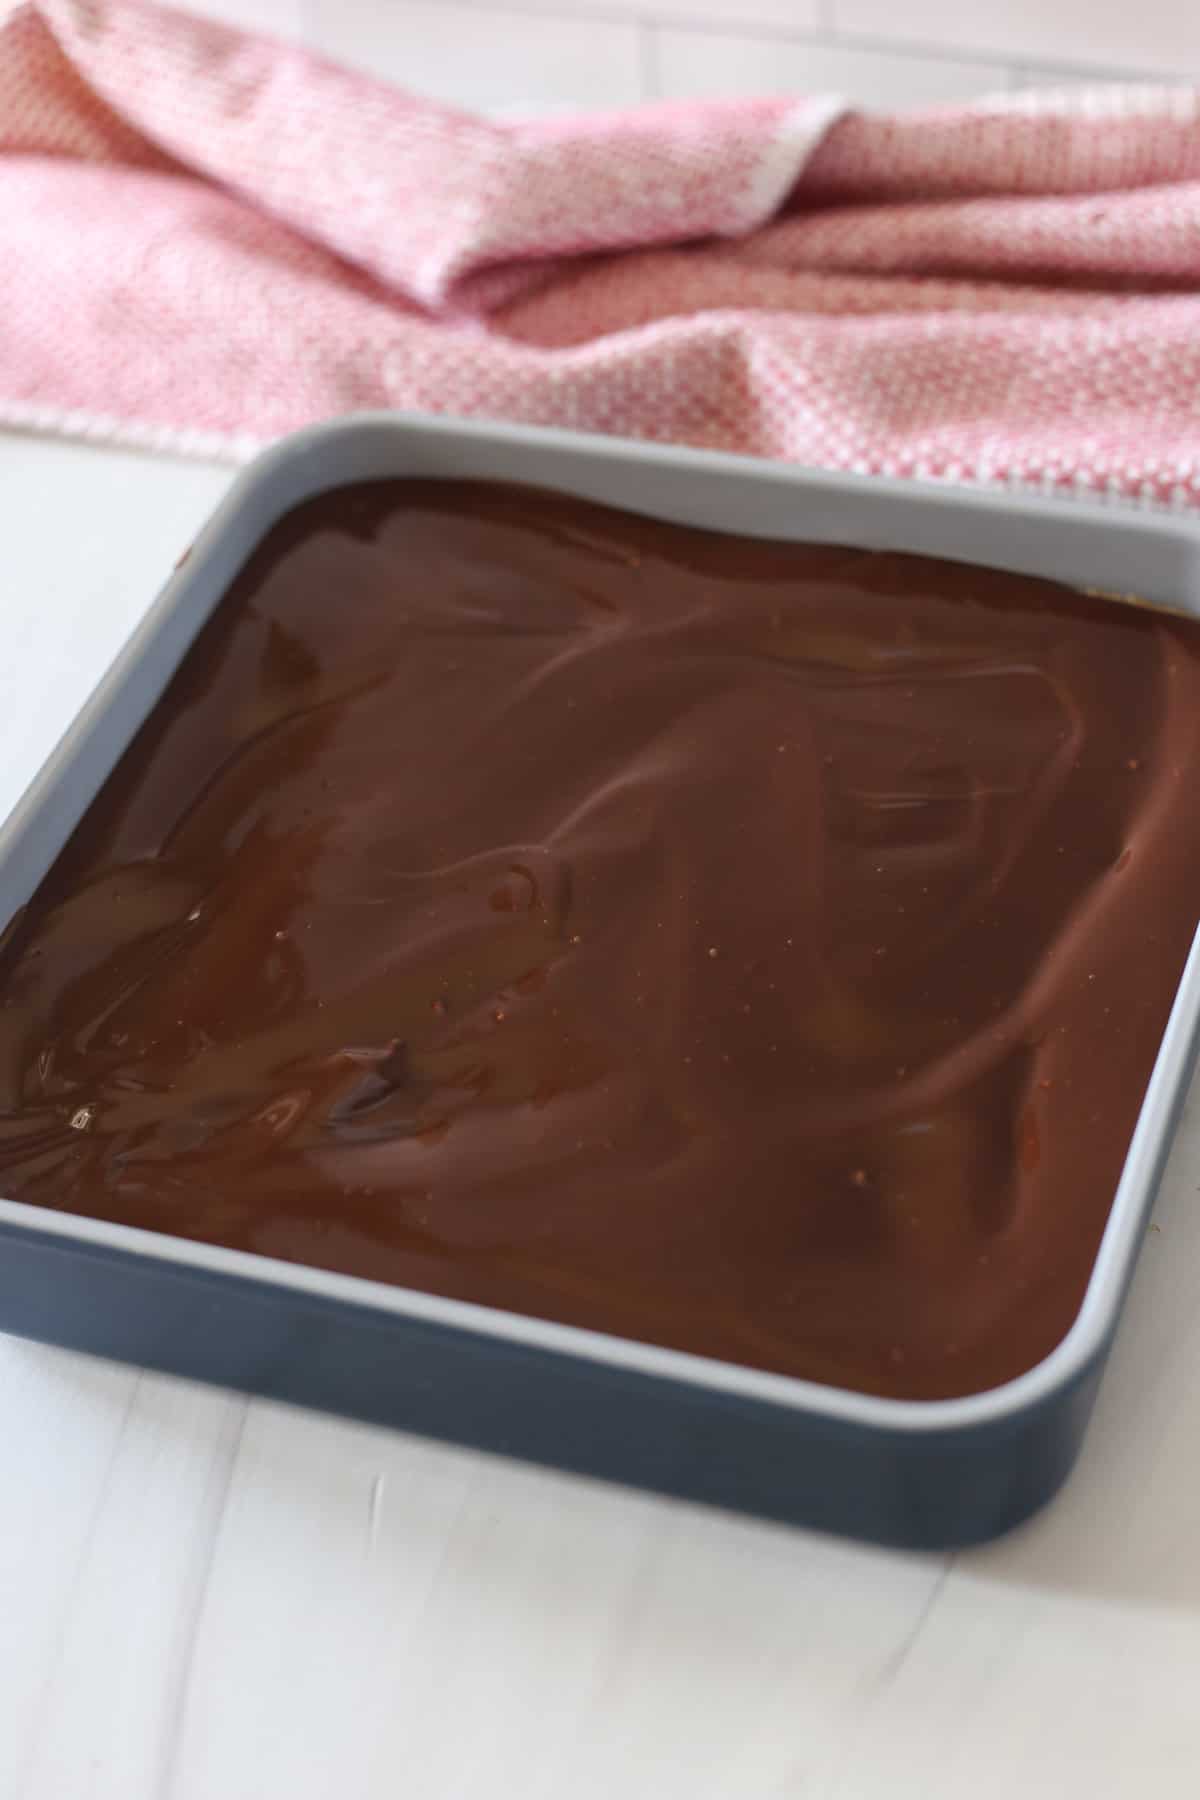 Chocolate Ganache layer spread out in a baking pan on top of brownie and peanut butter layers to make Buckeye Brownies.